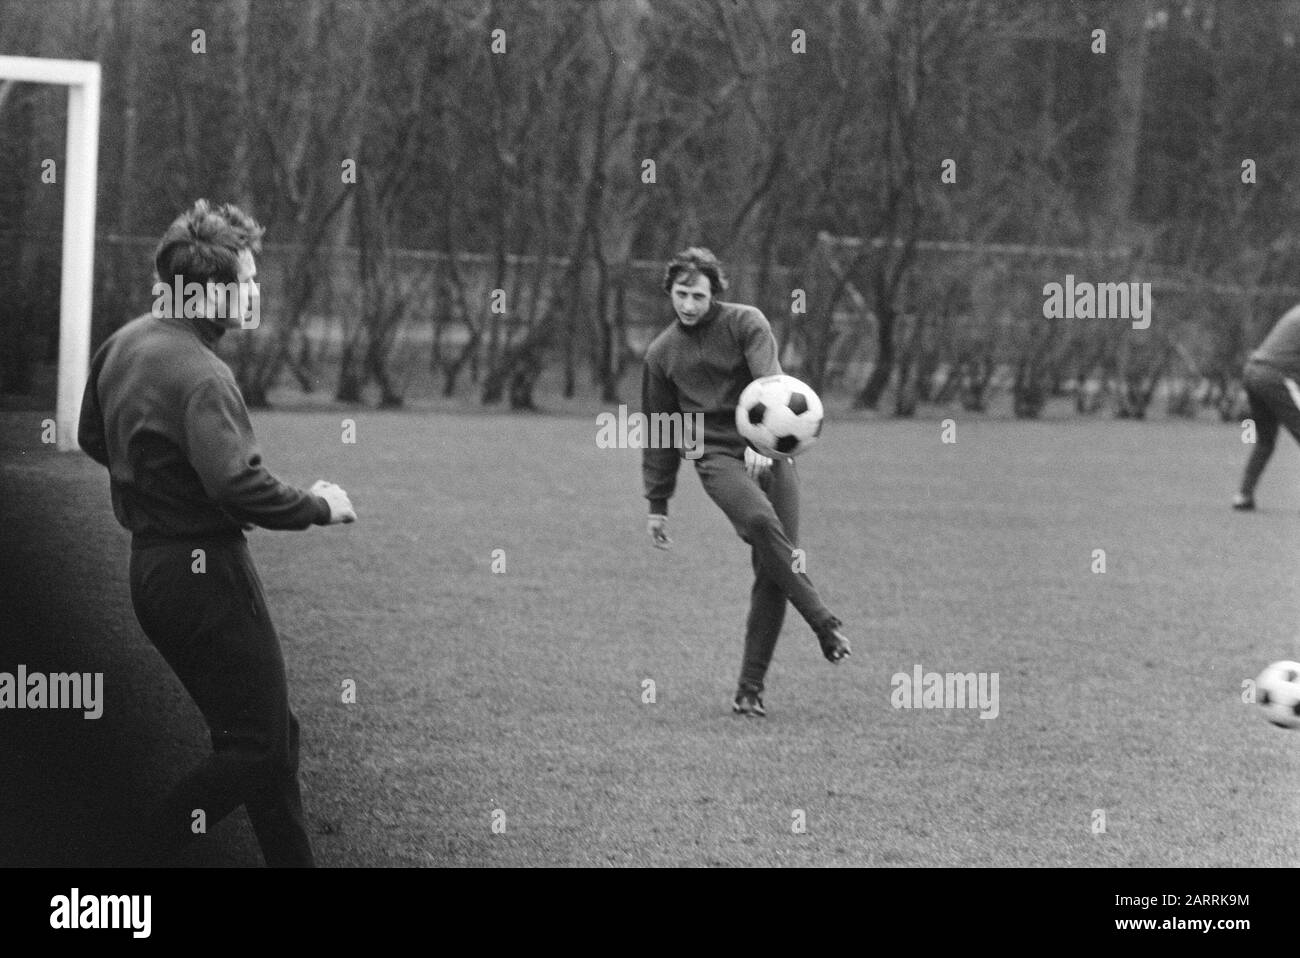 Selection for Dutch team trains for match against Luxembourg, Zeist Date: February 15, 1971 Location: Luxemburg, Zeist Keywords: sport, football Institution name: Dutch national team Stock Photo